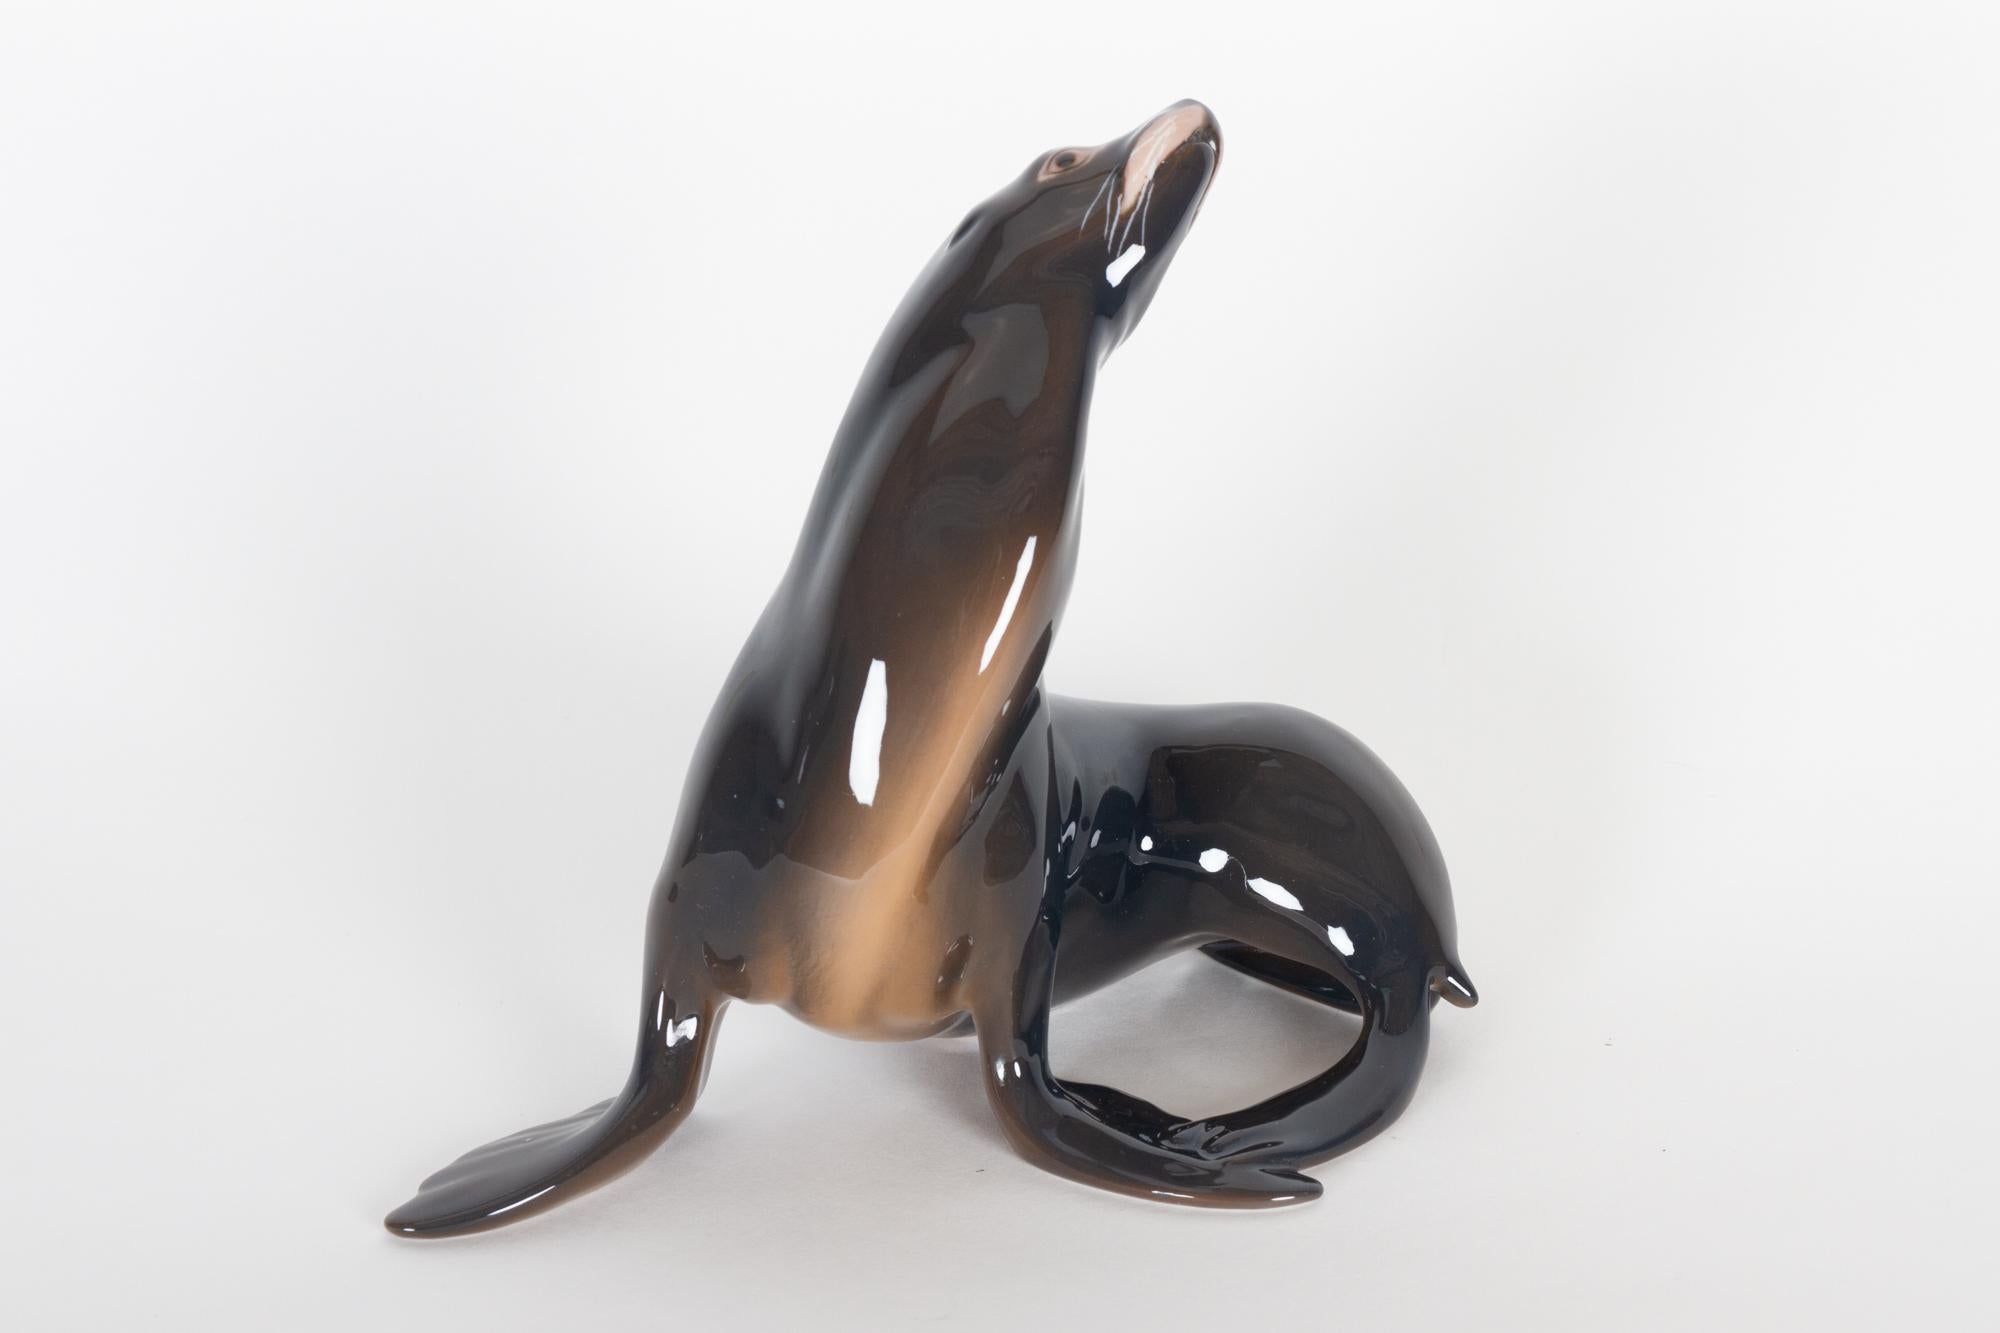 Vintage Danish Porcelain sea lion figurine by Bing & Grøndahl
Very decorative hand painted sea lion sculpture in porcelain from the period 1915 to 1947. Designed by Knud Møller for the Danish company Bing & Grøndahl.
Very good condition, no chips